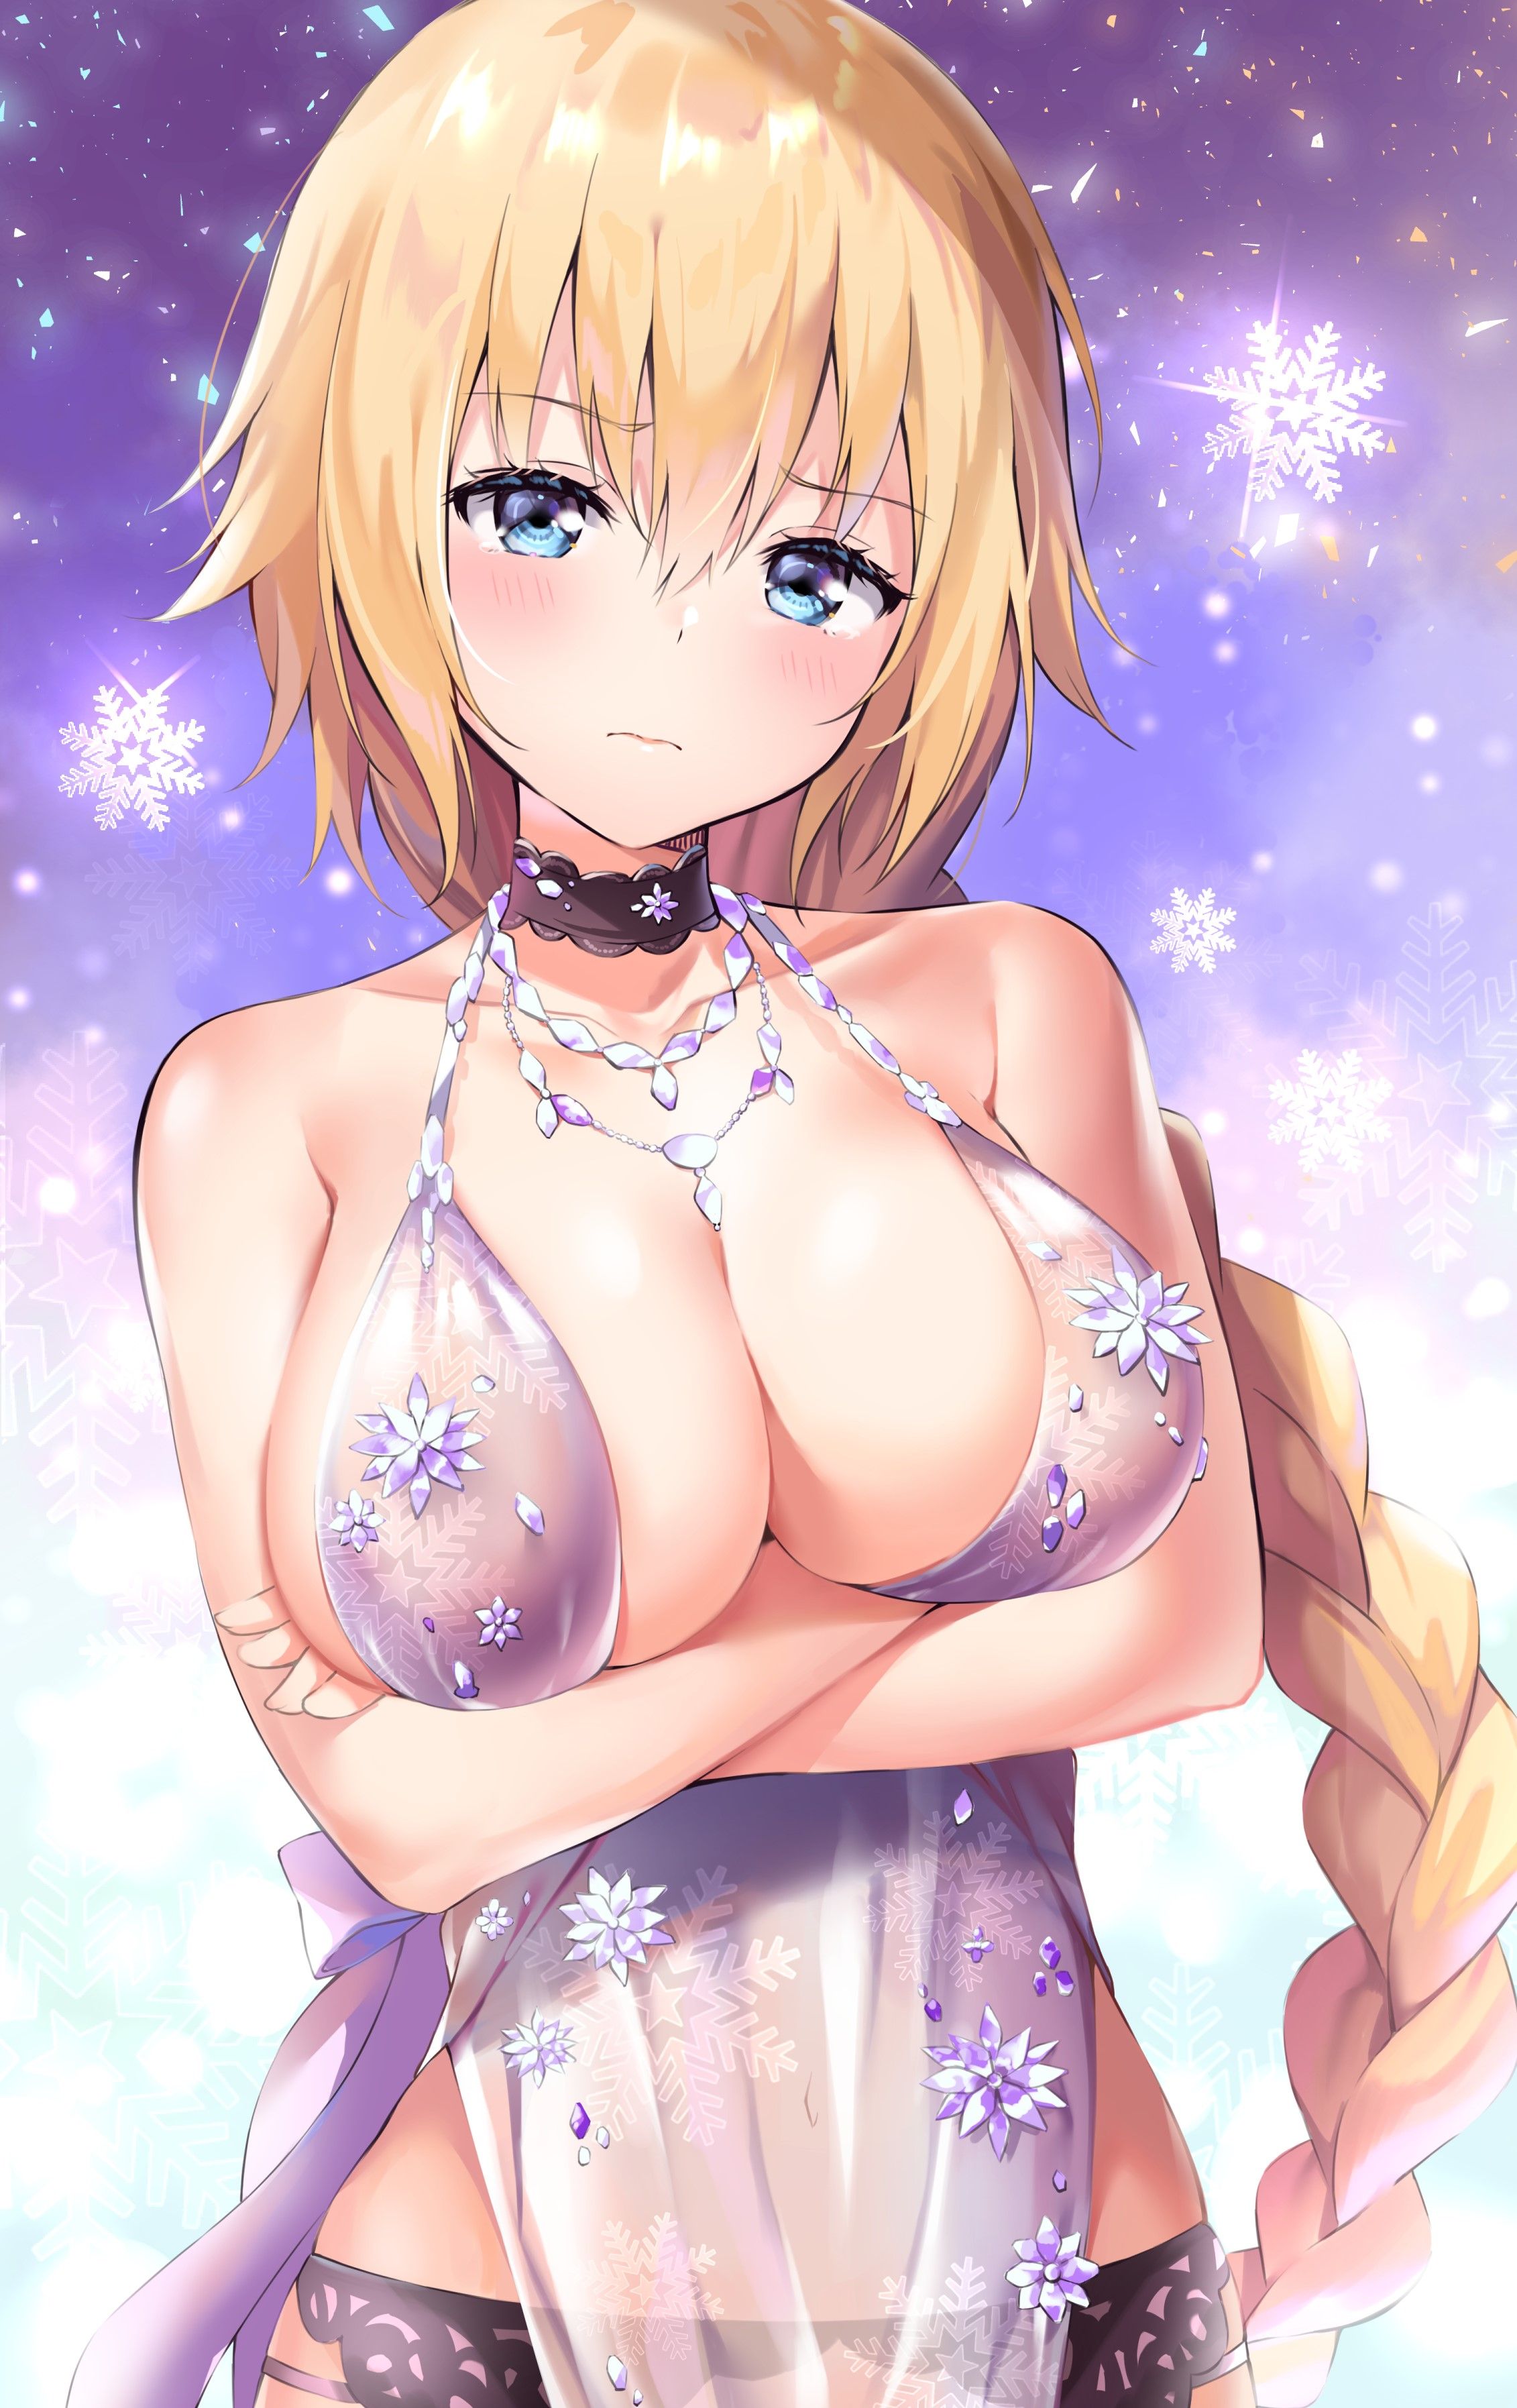 【Erotic Anime Summary】 Valley erotic images of busty beauties 【50 photos】 2